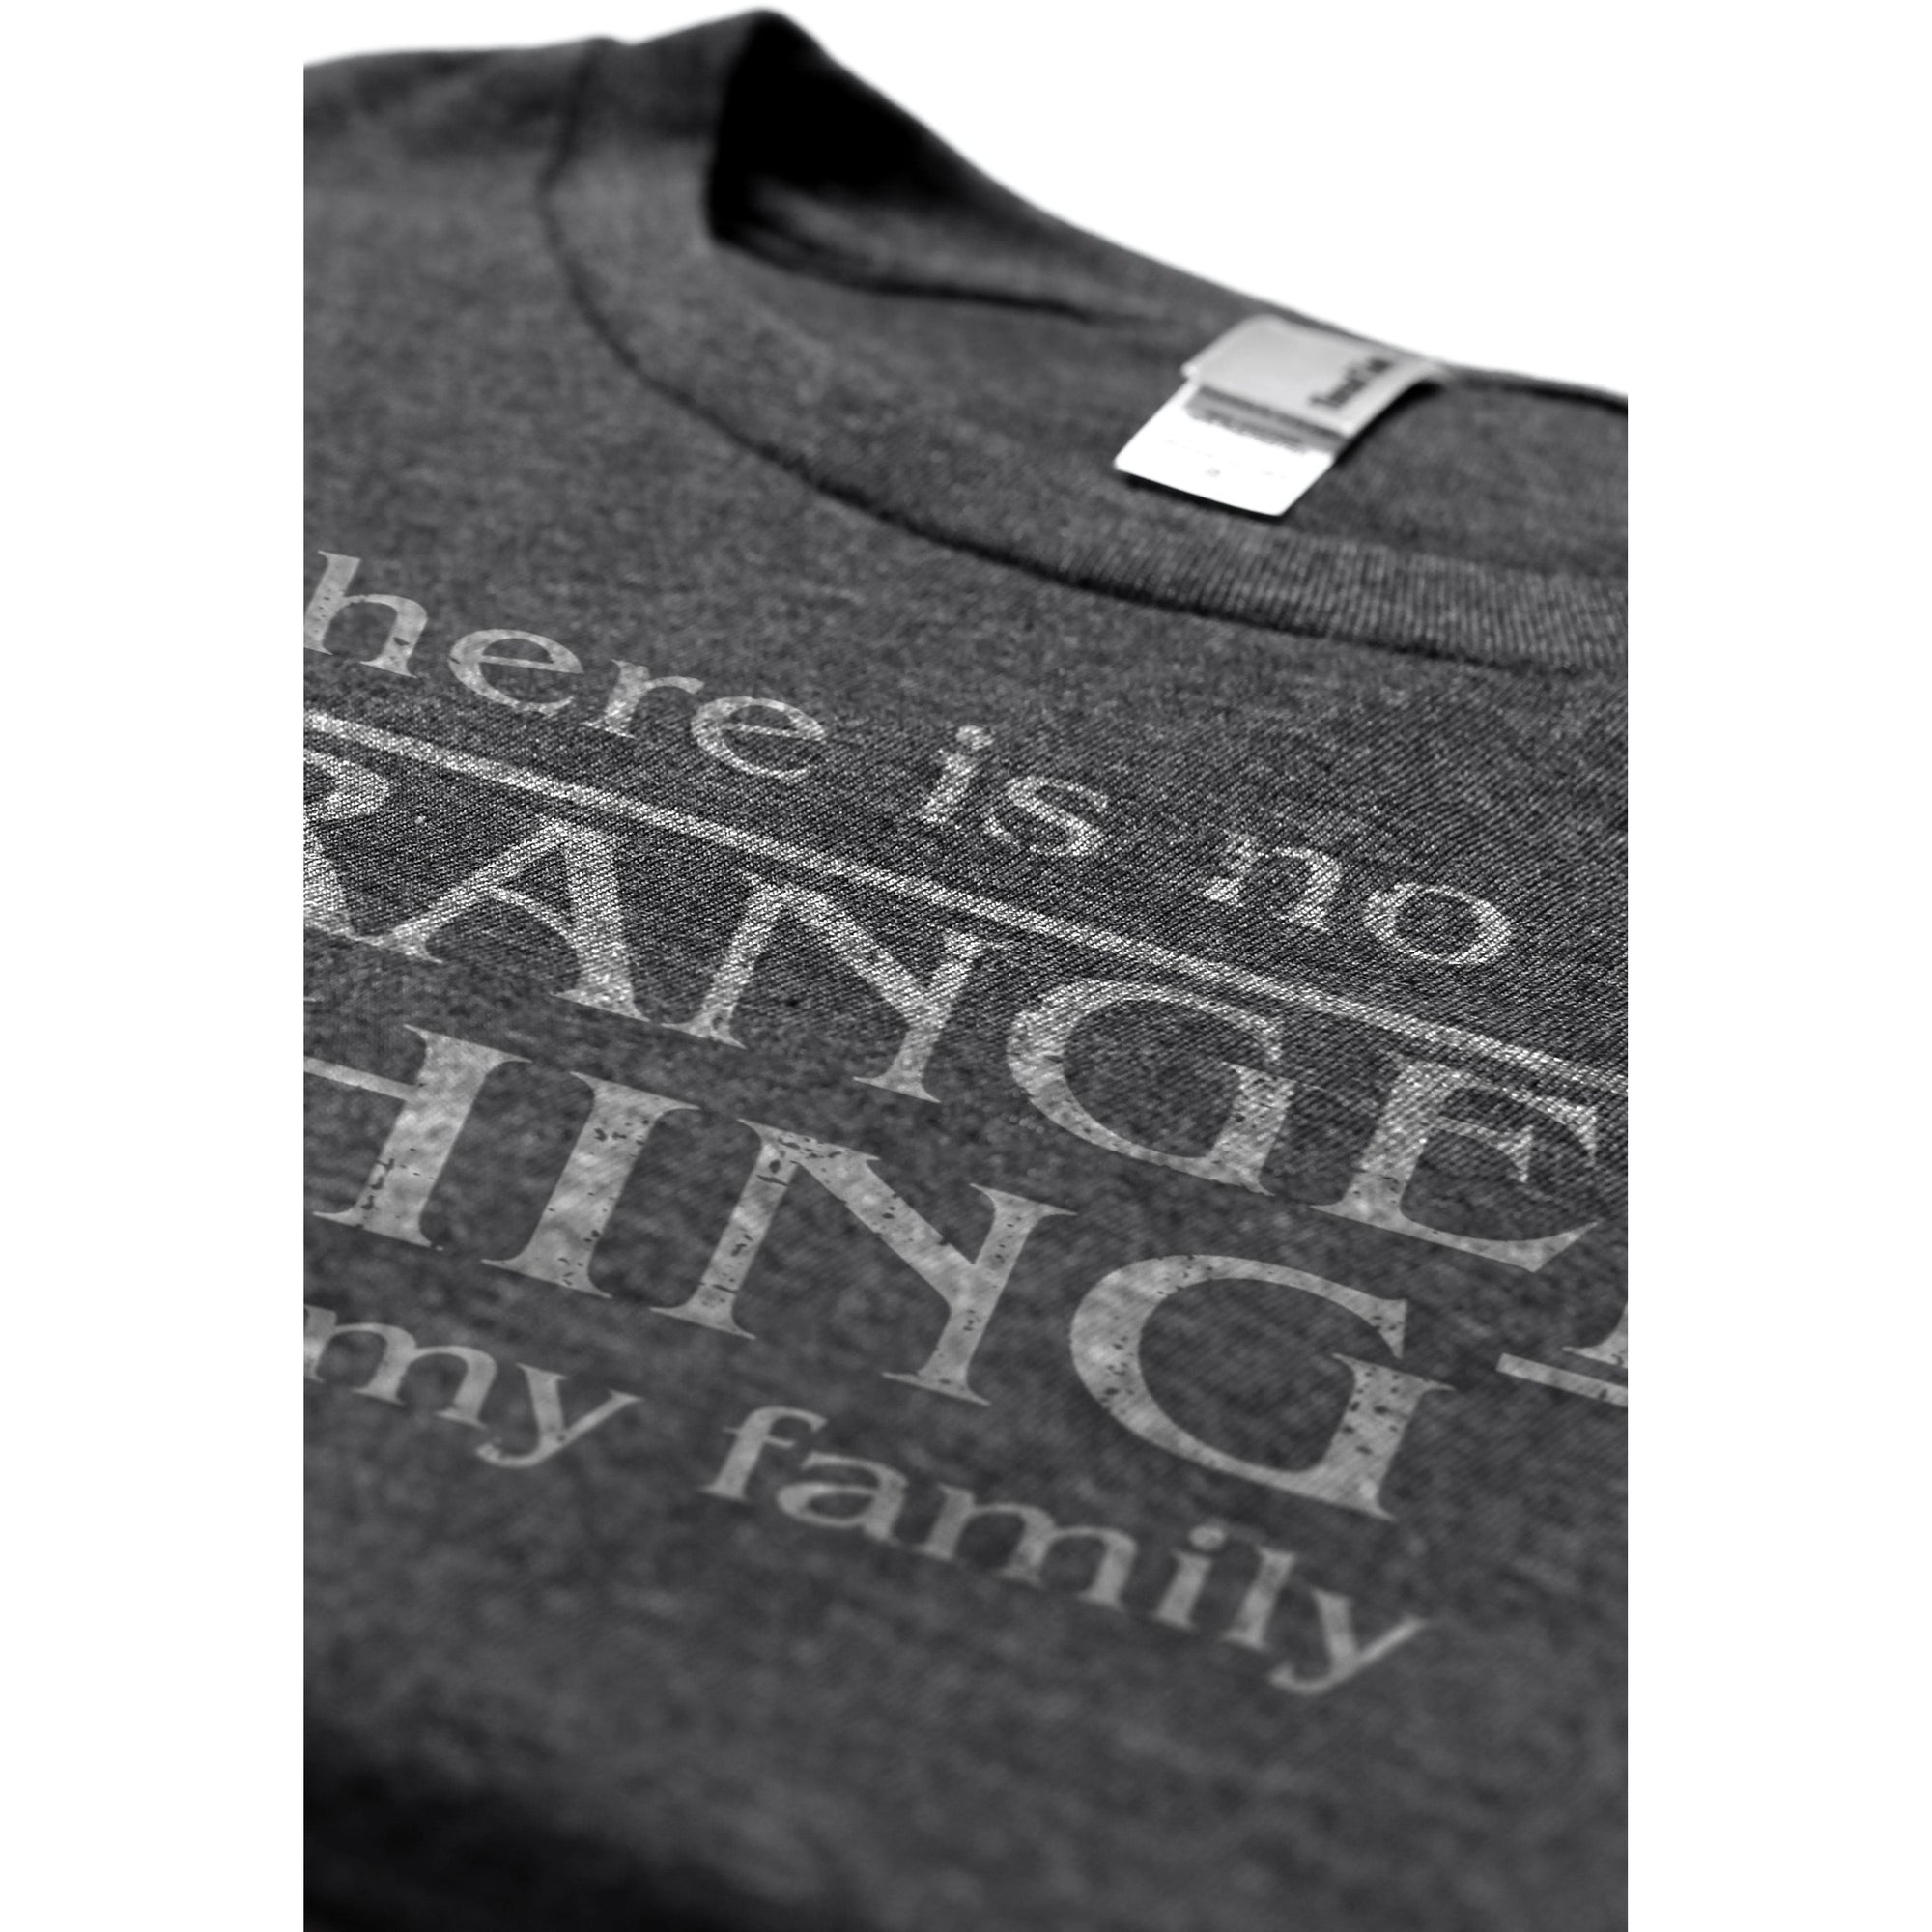 There Is No Stranger Thing Than My Family - thread tank | Stories you can wear.